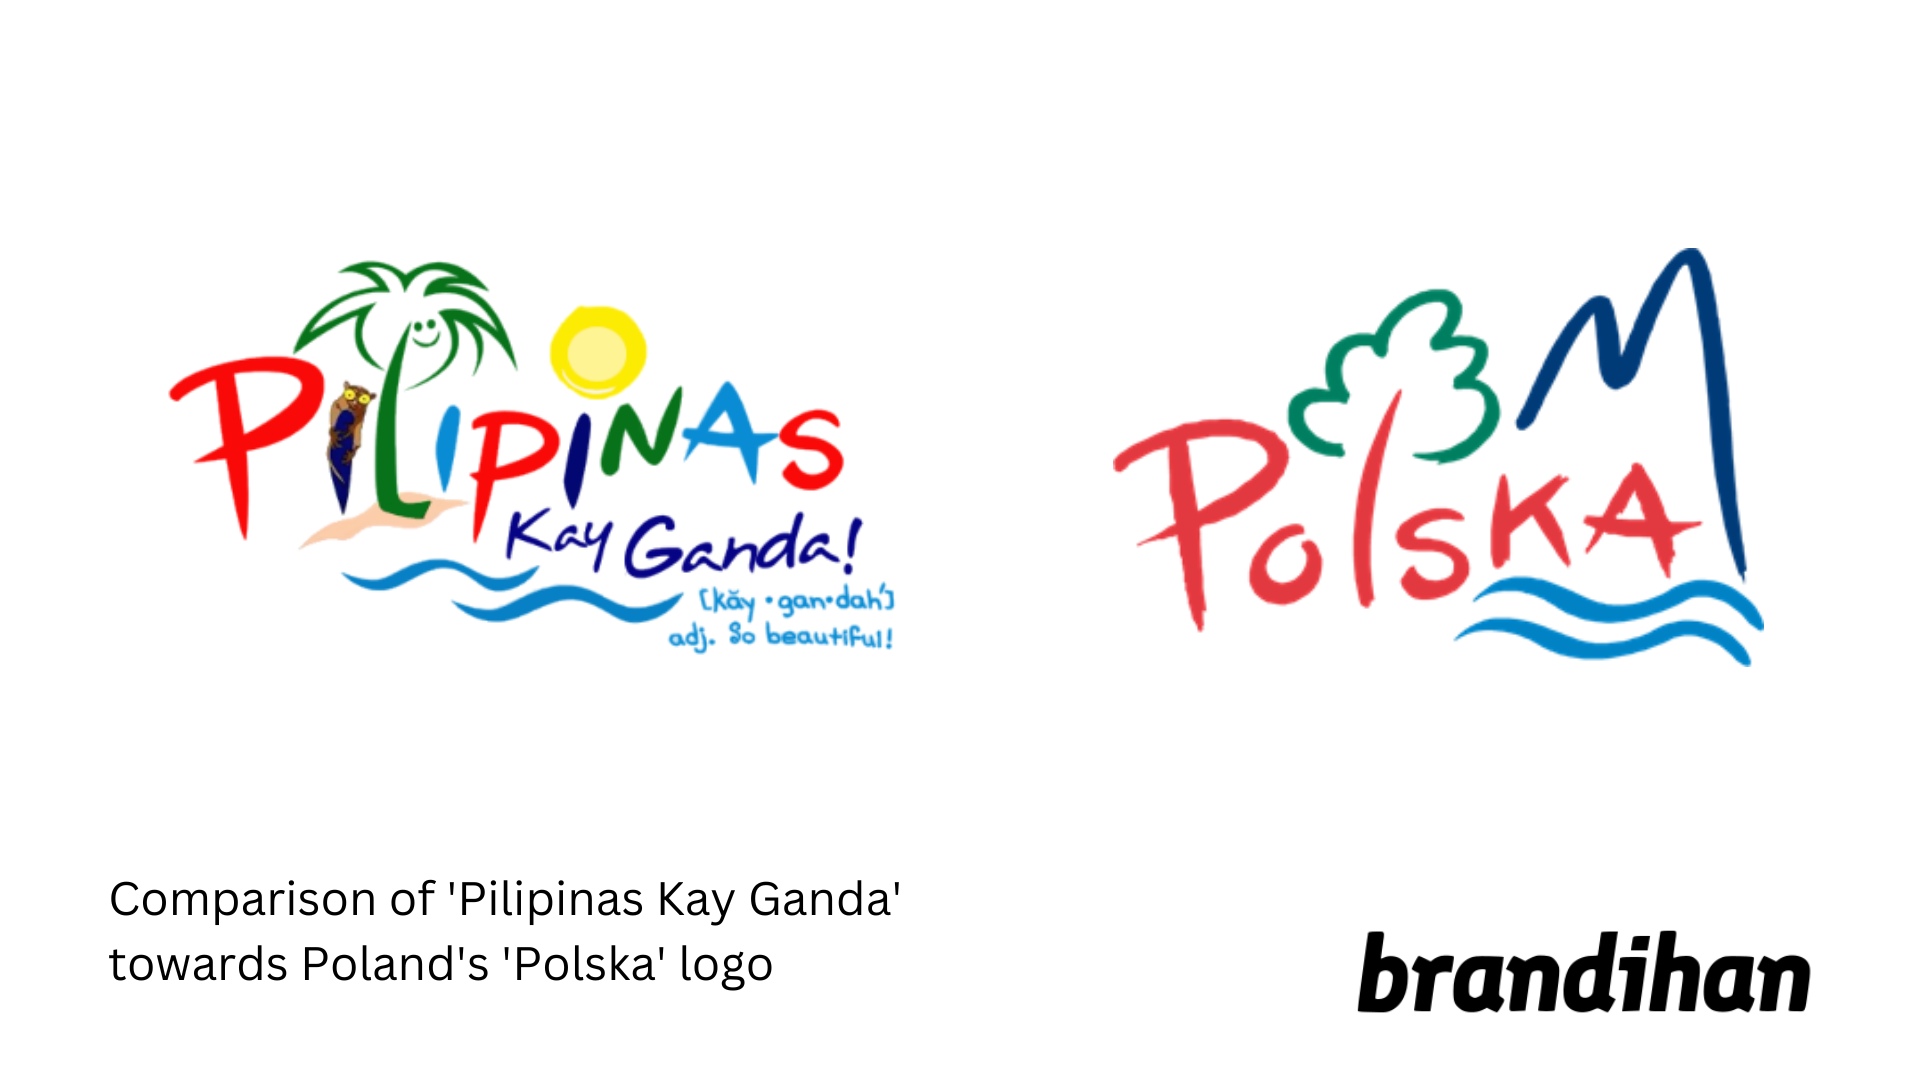 “Love the Philippines” and the History of DOT Tourism Campaign Fiascos